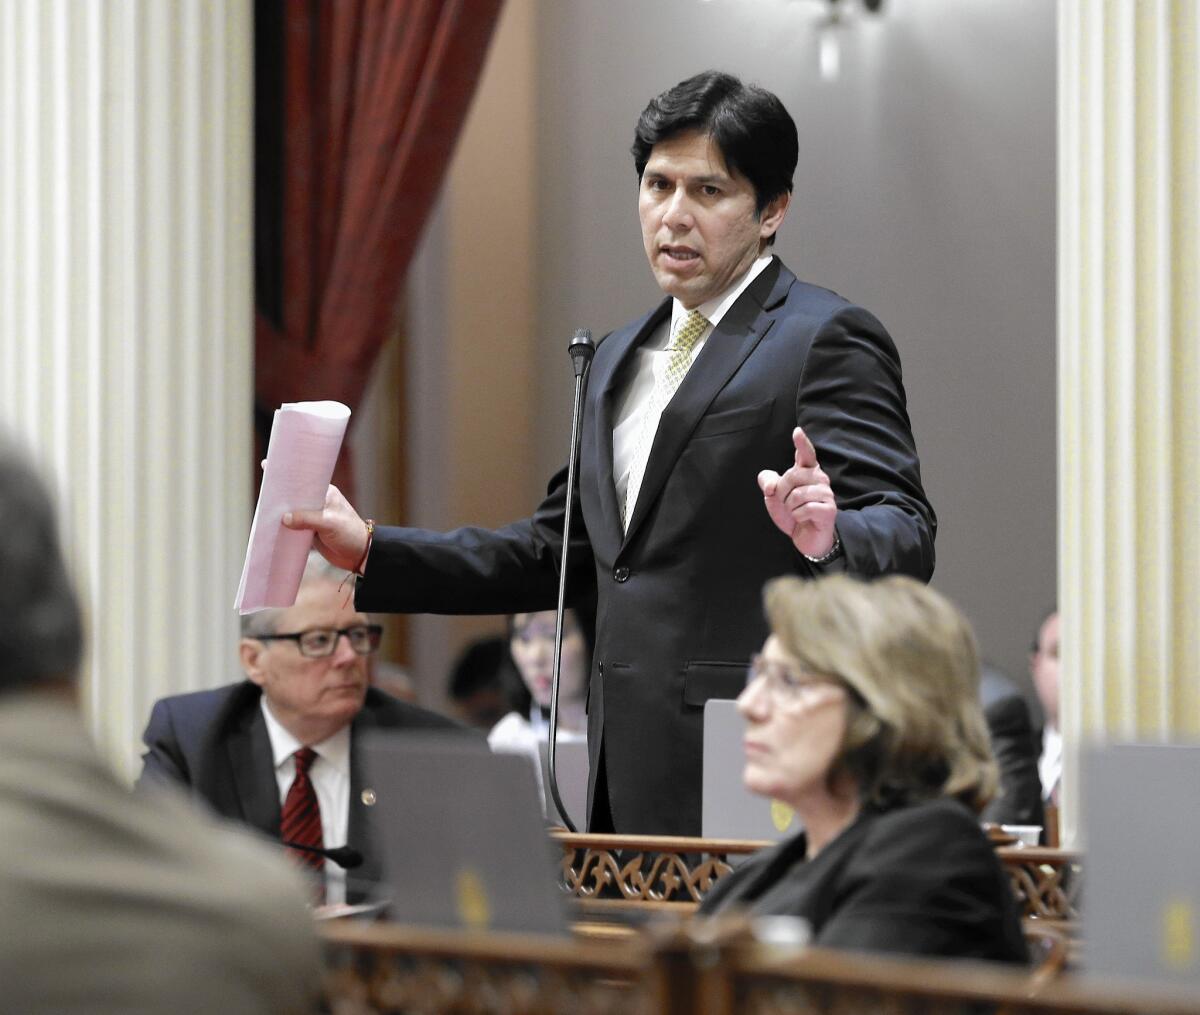 State Senate leader Kevin de León helped expand California’s film and TV tax credit program.